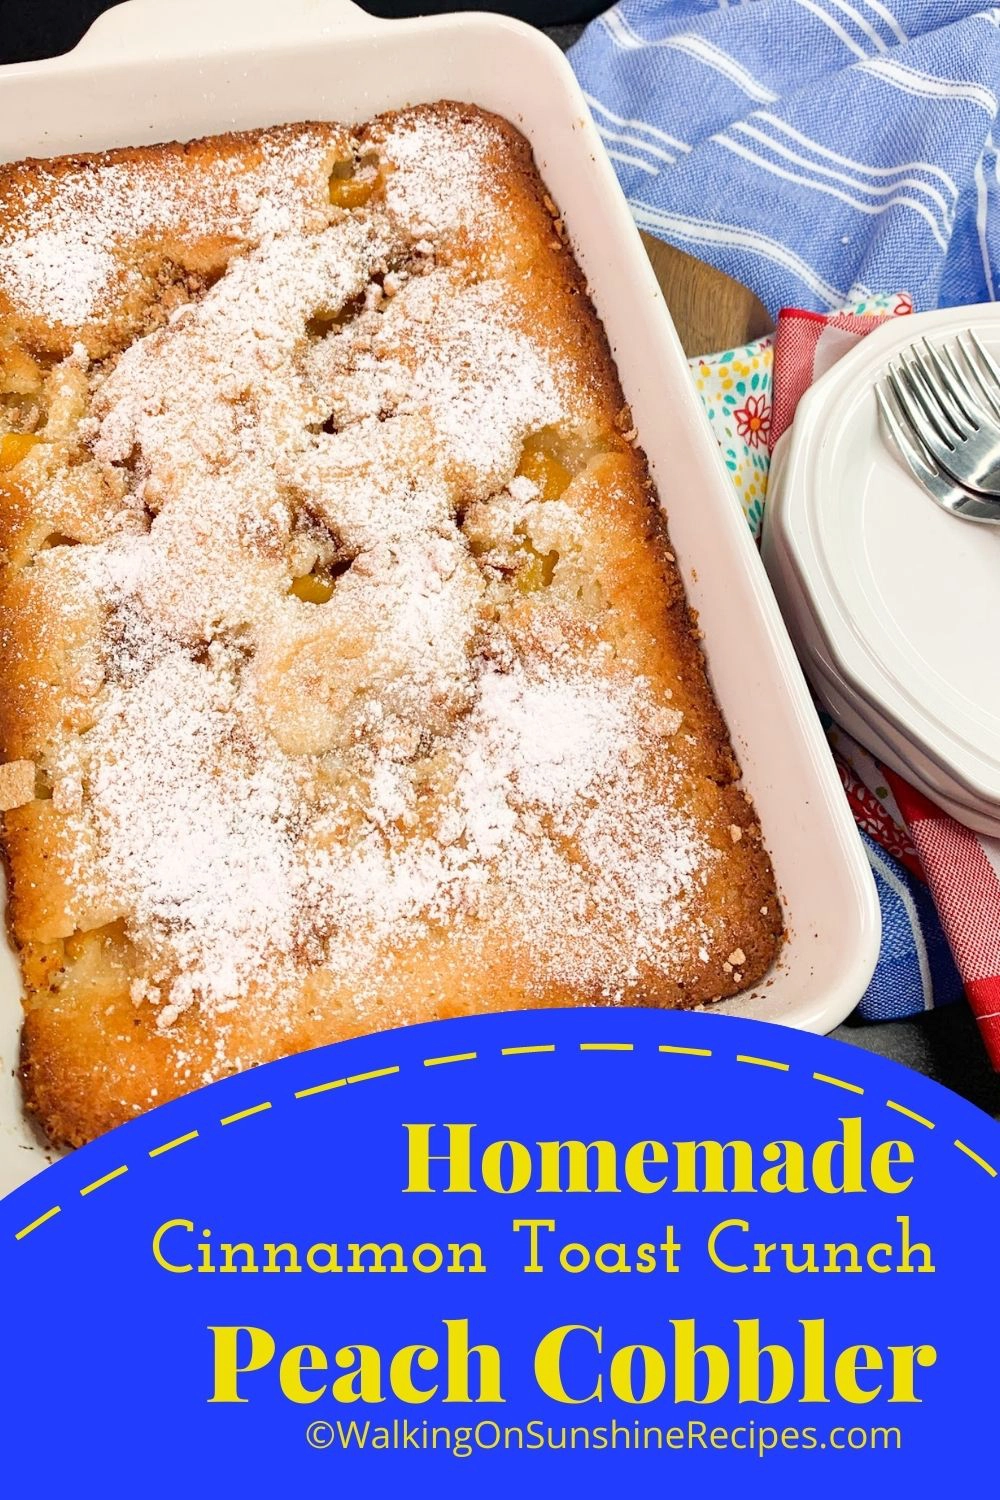 Baked Peach Cobbler with powdered sugar.